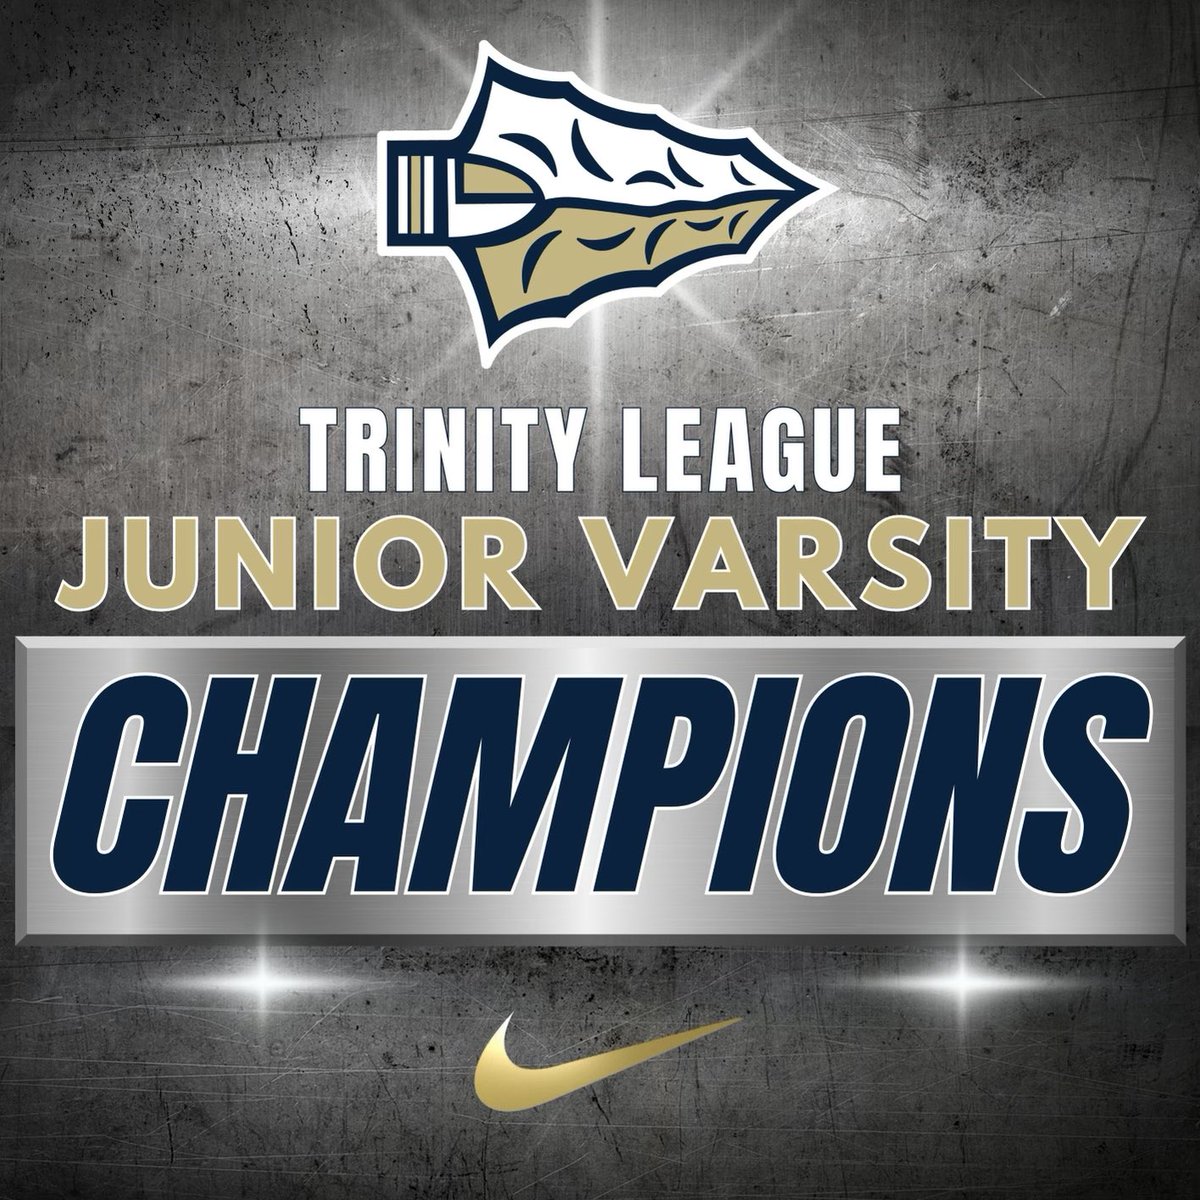 JV Final: Congratulations to the Junior Varsity St. John Bosco Braves on capturing an undefeated Trinity League Title by defeating Orange Lutheran 48-7. #DestinationBosco